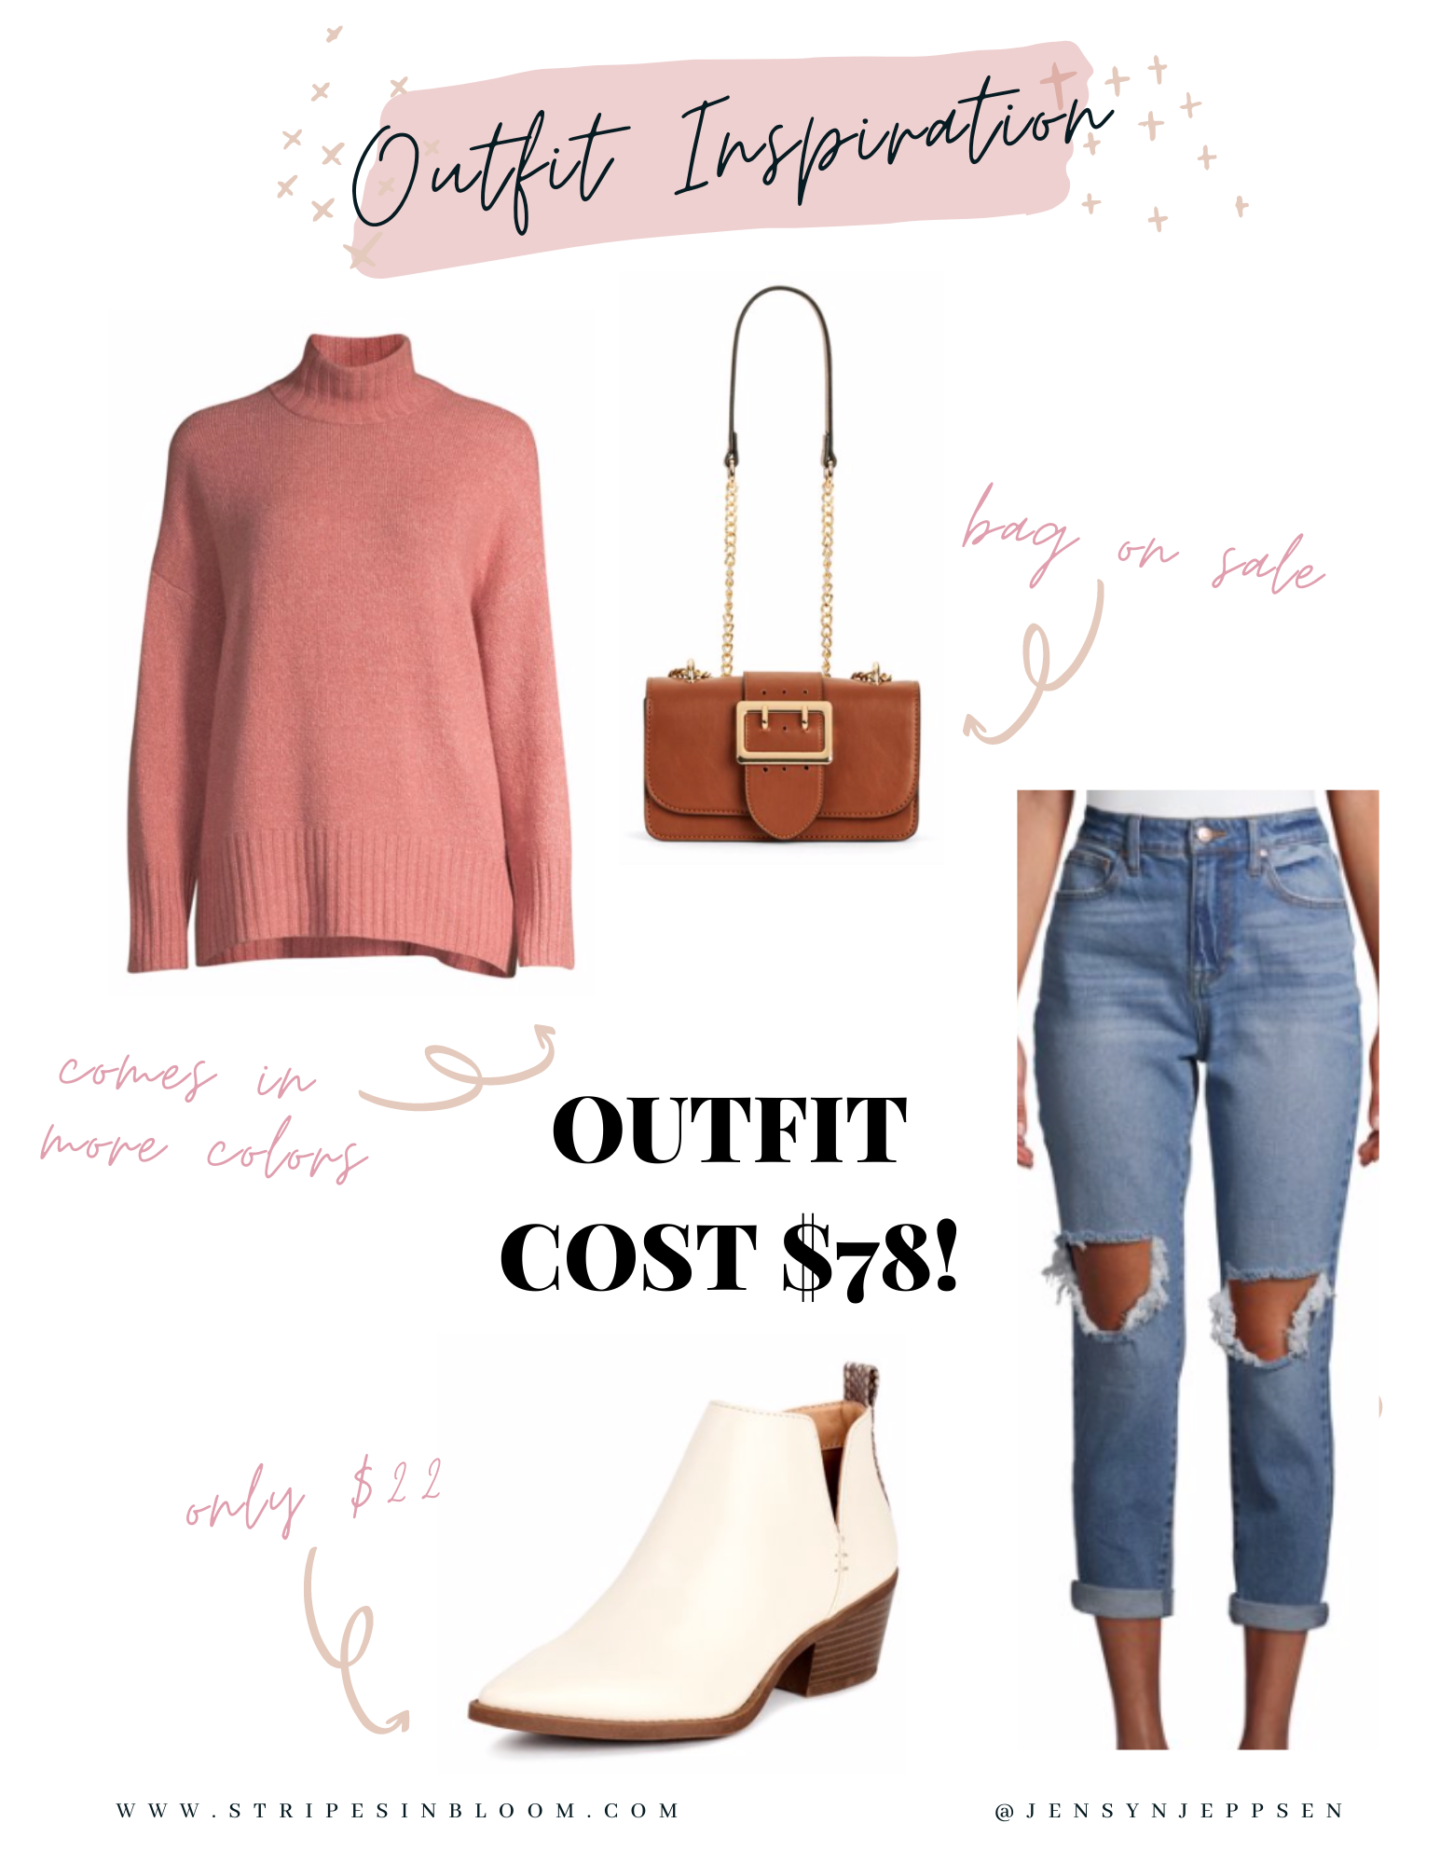 AFFORDABLE WALMART FALL OUTFITS ON A BUDGET